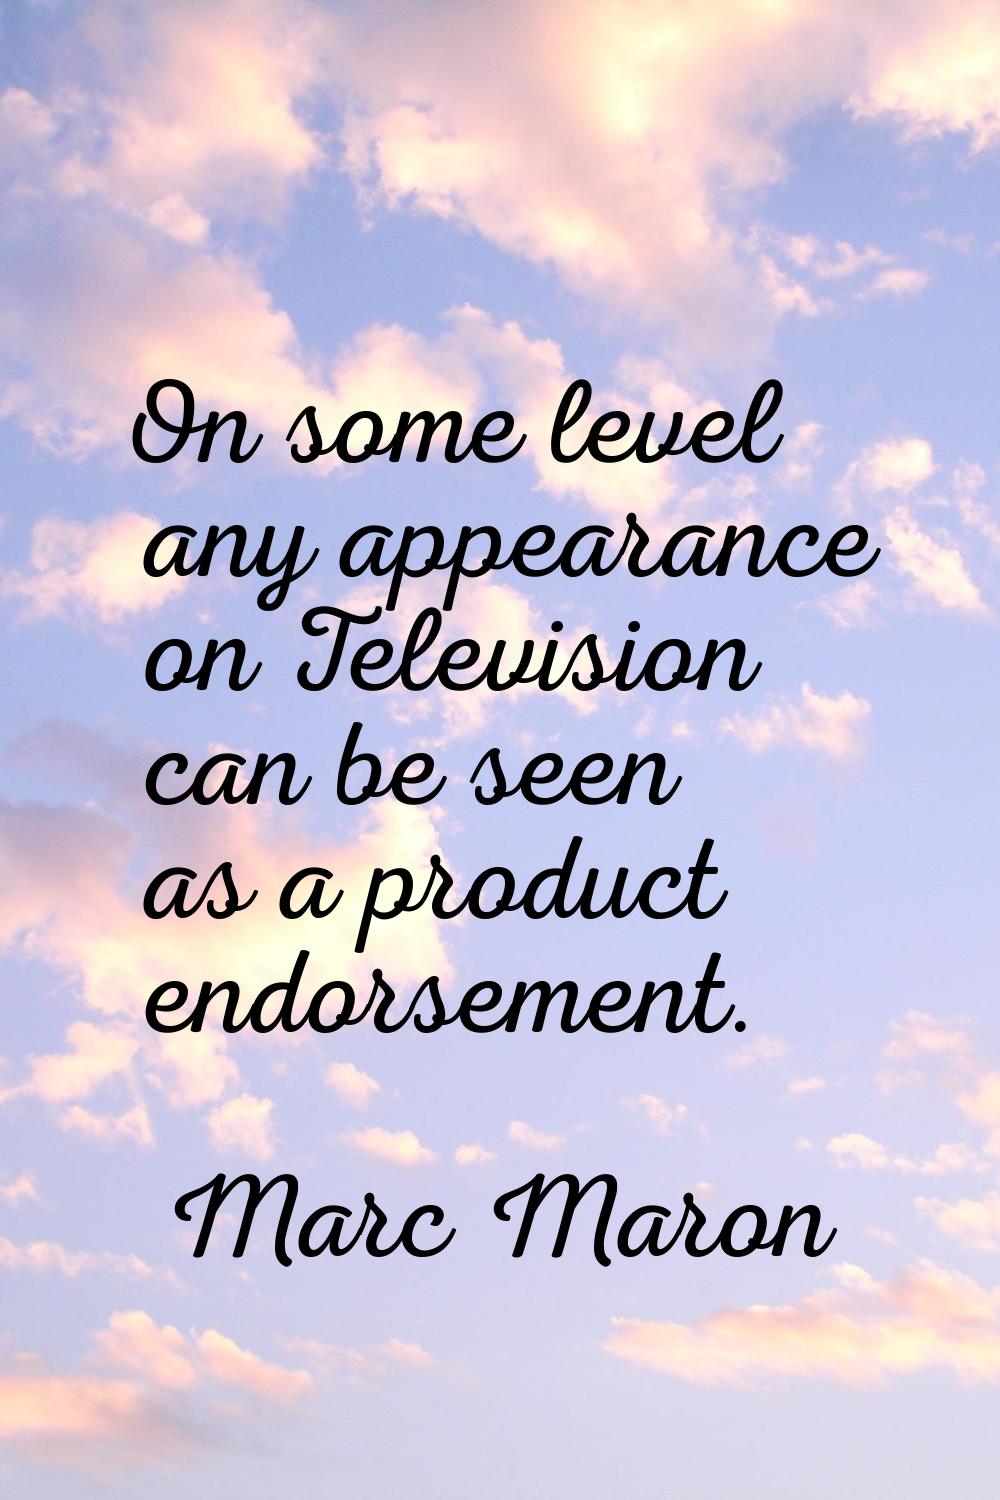 On some level any appearance on Television can be seen as a product endorsement.